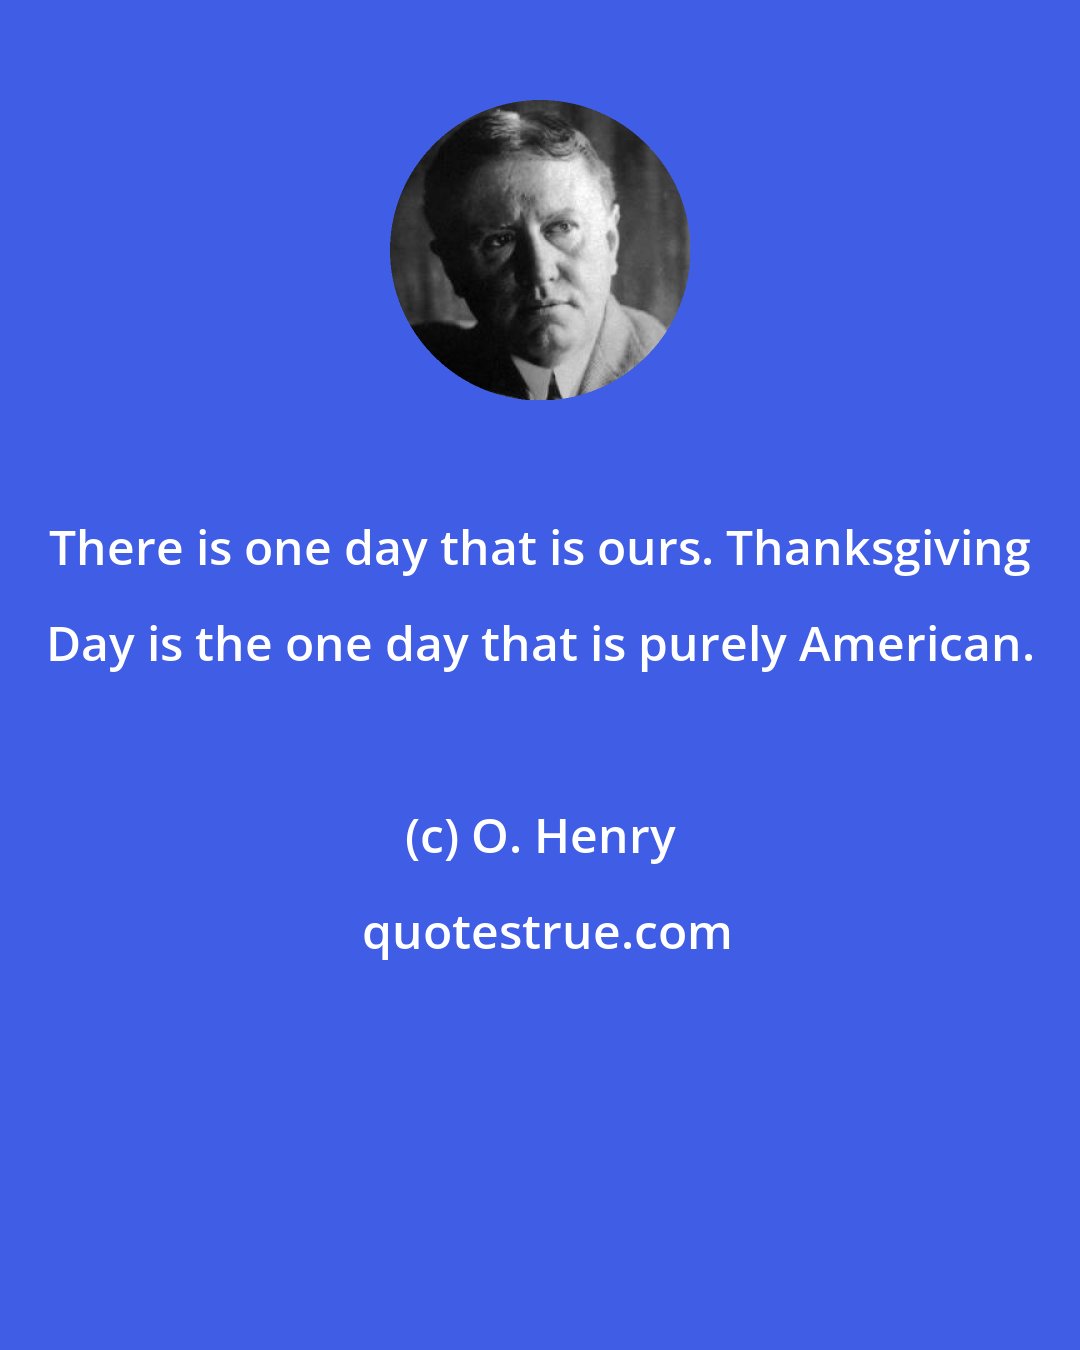 O. Henry: There is one day that is ours. Thanksgiving Day is the one day that is purely American.